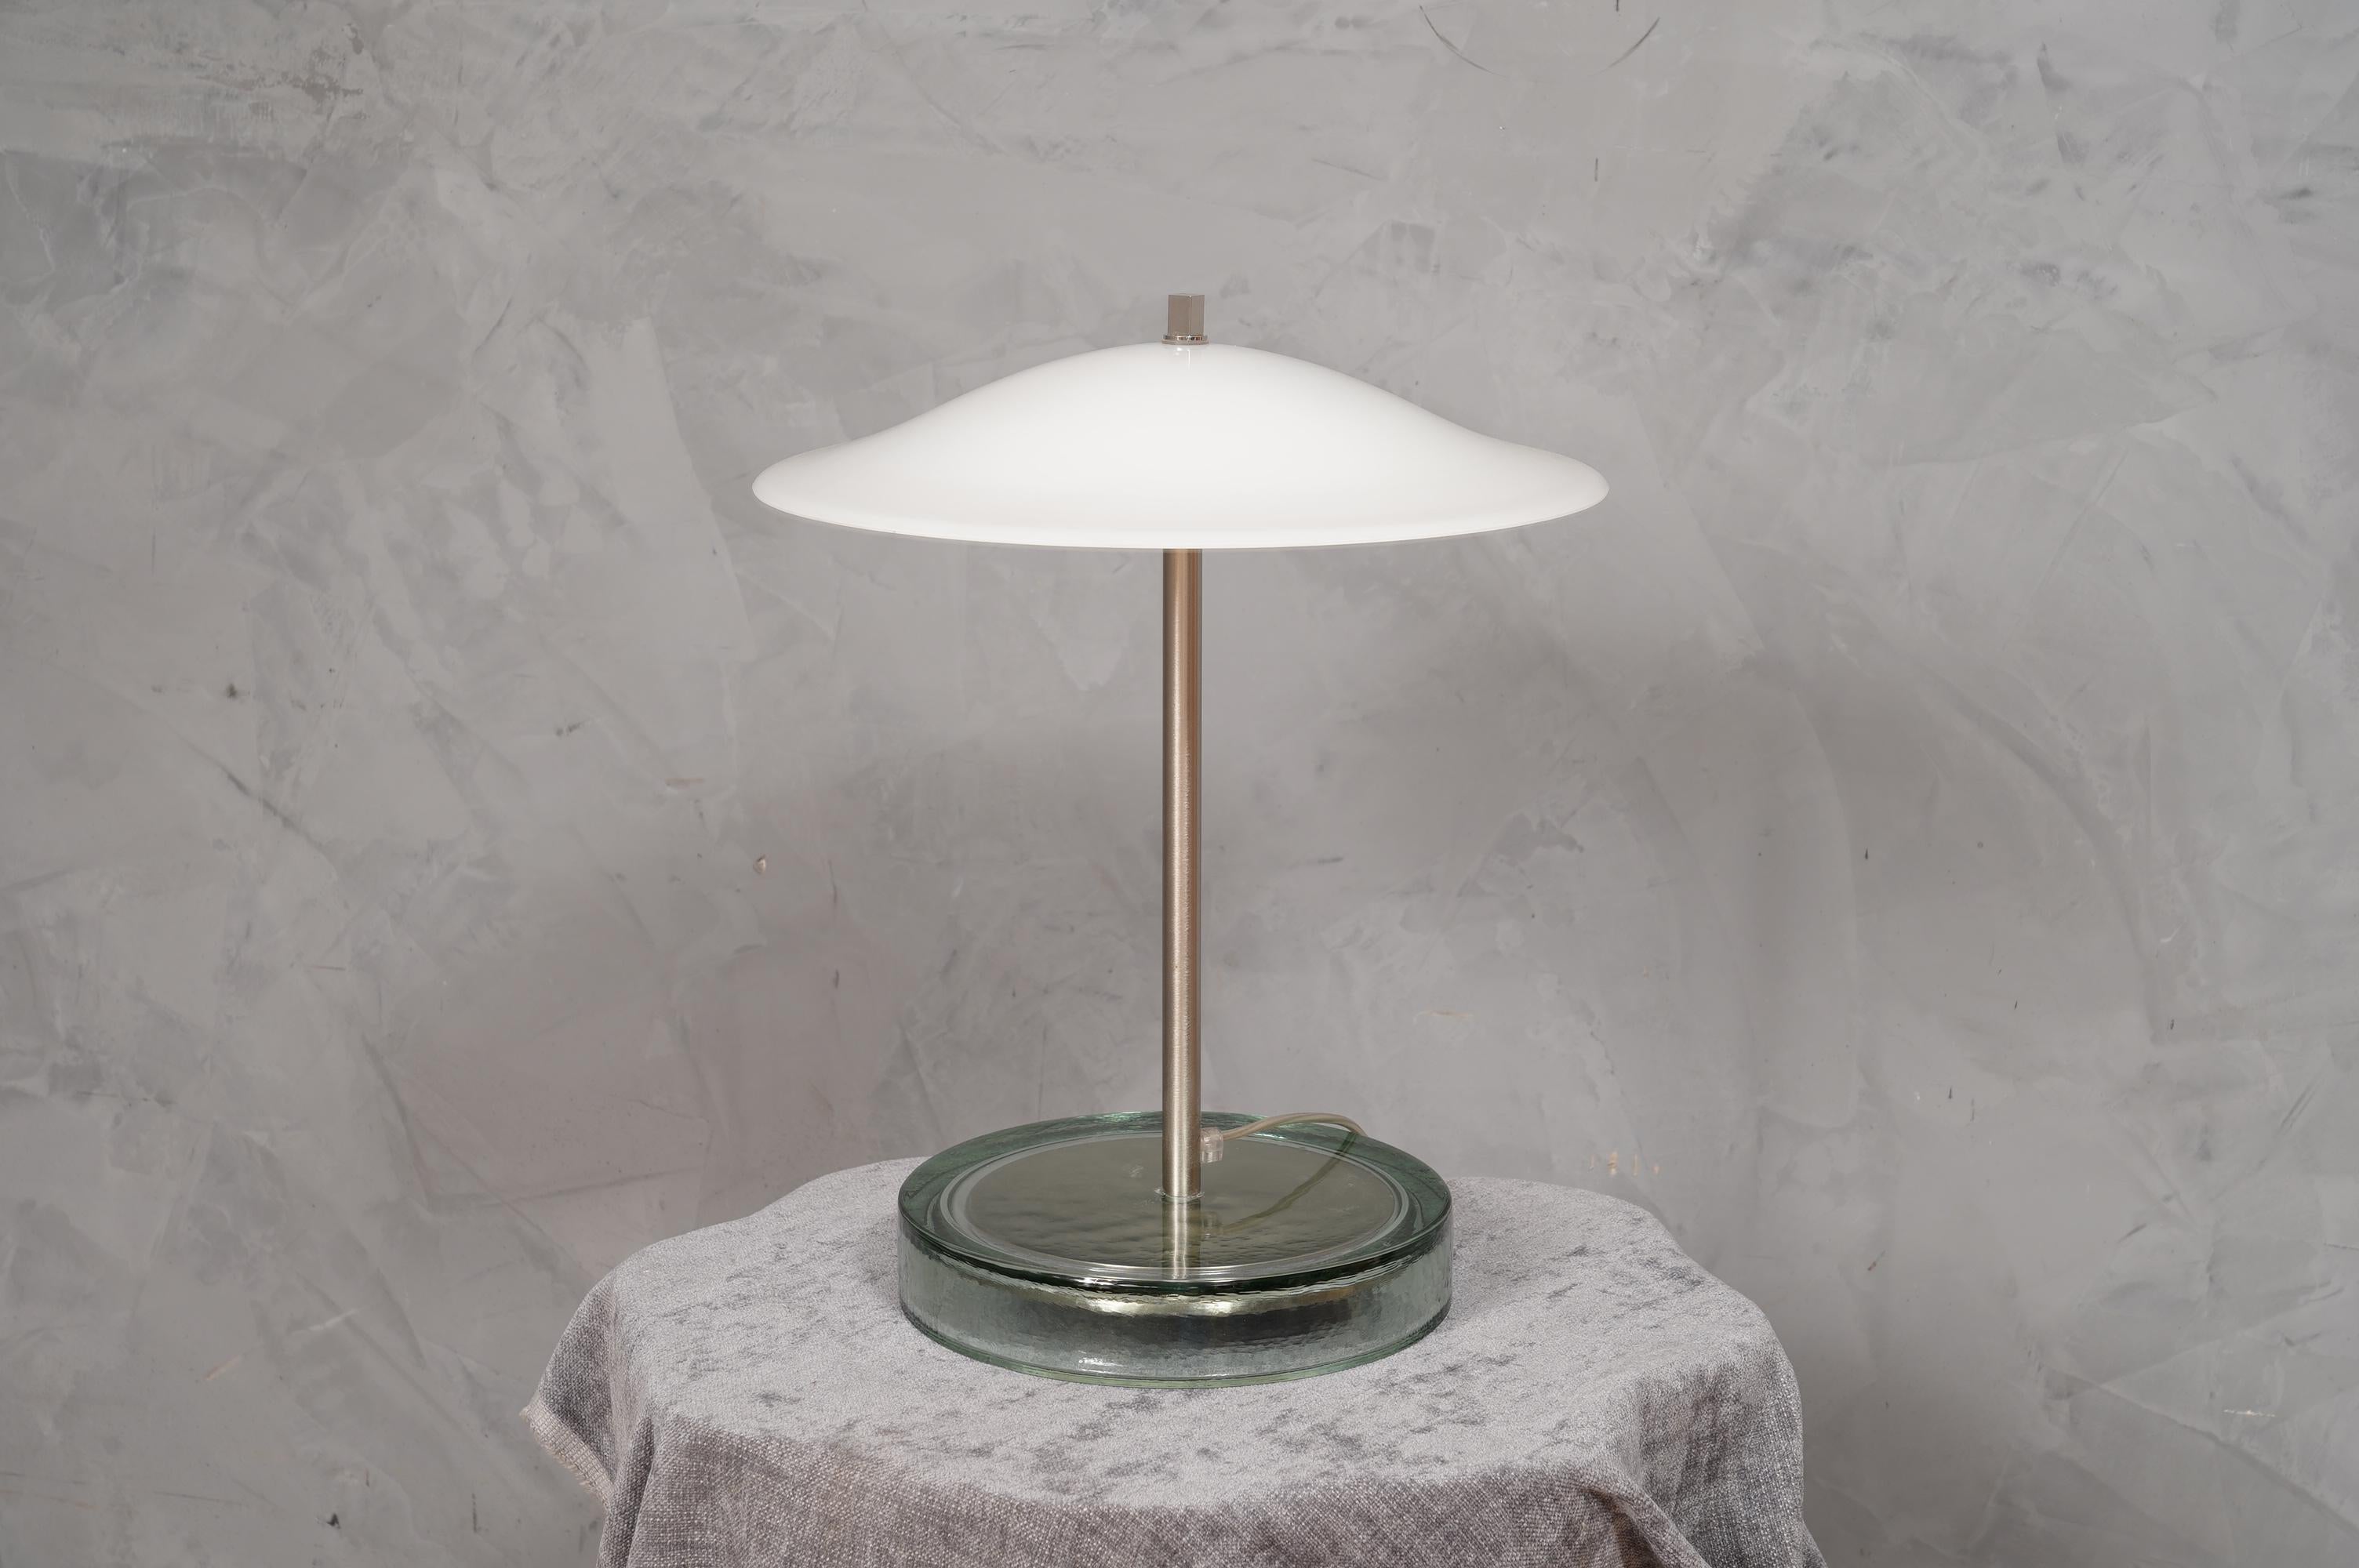 Murano in Style of Vistosi Blown White Glass and Steel Table Lamp, 1980 For Sale 2